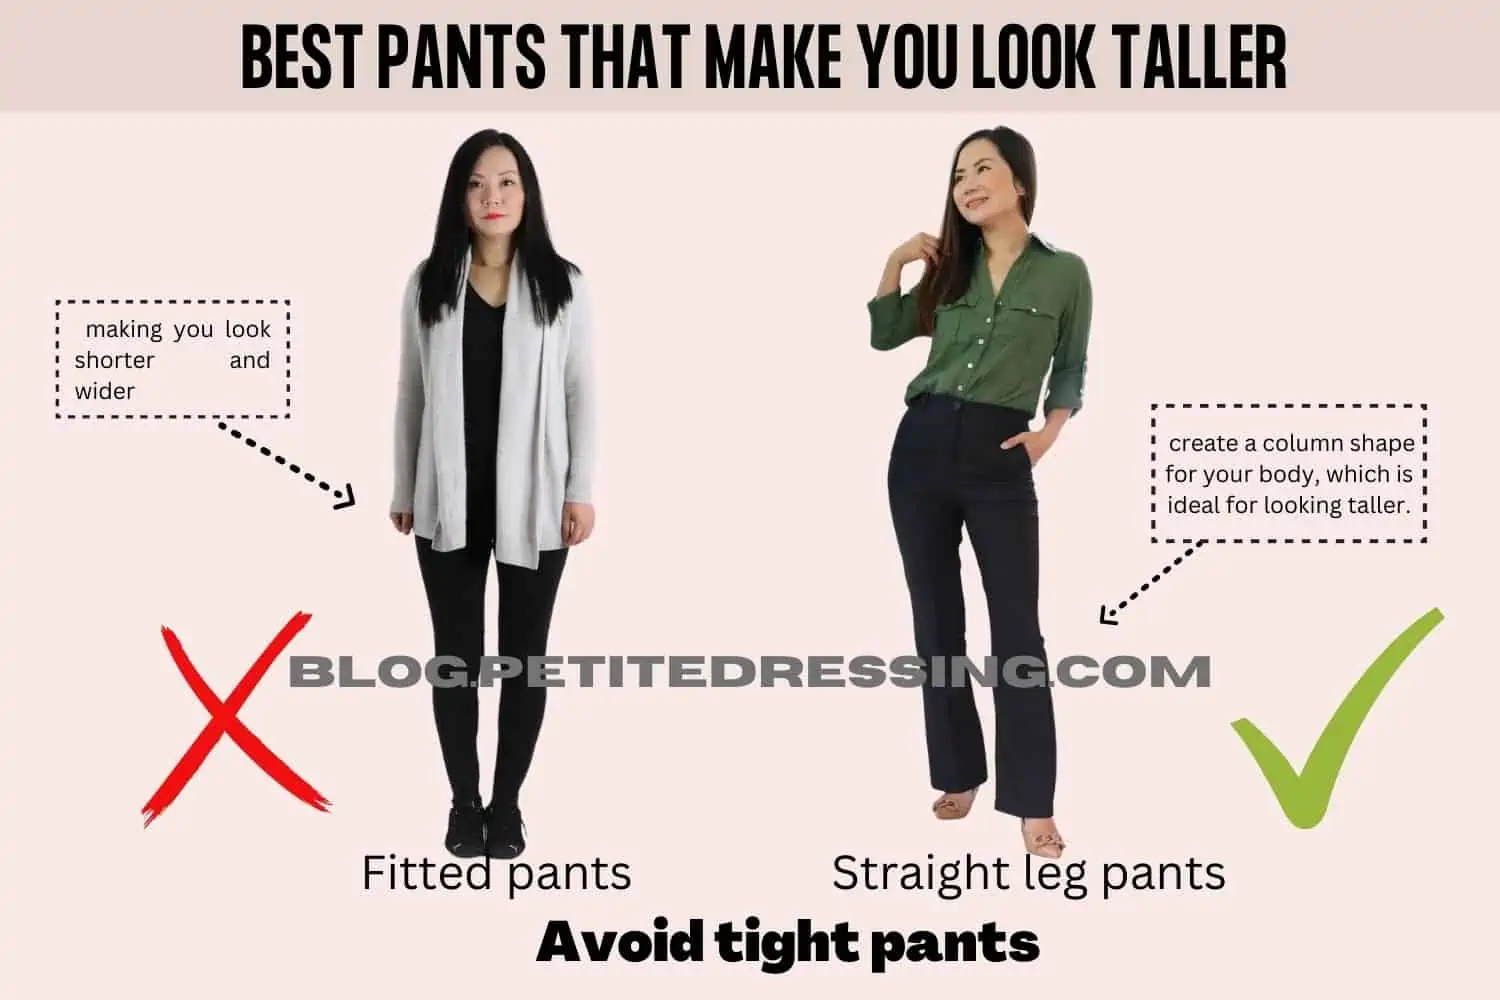 Do Cropped Pants Make You Look Taller Or Shorter